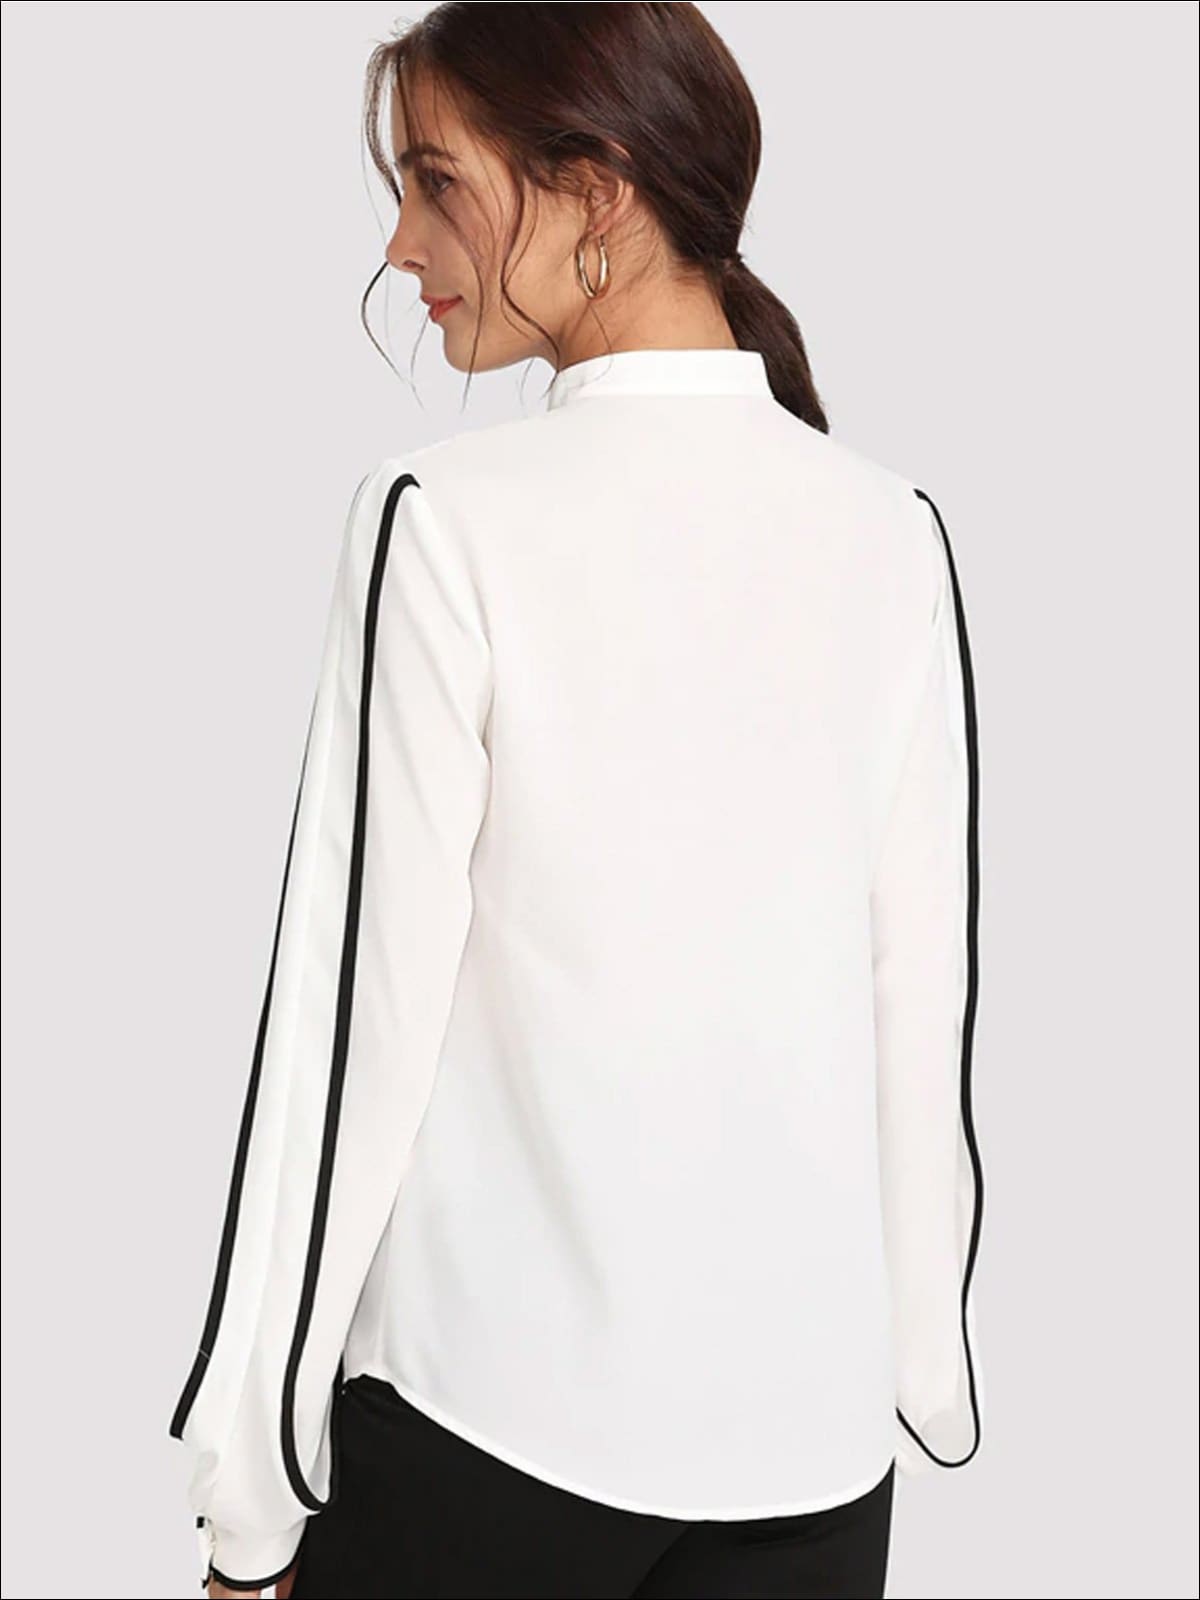 Womens White Button Up Long Sleeve Blouse - Womens Tops